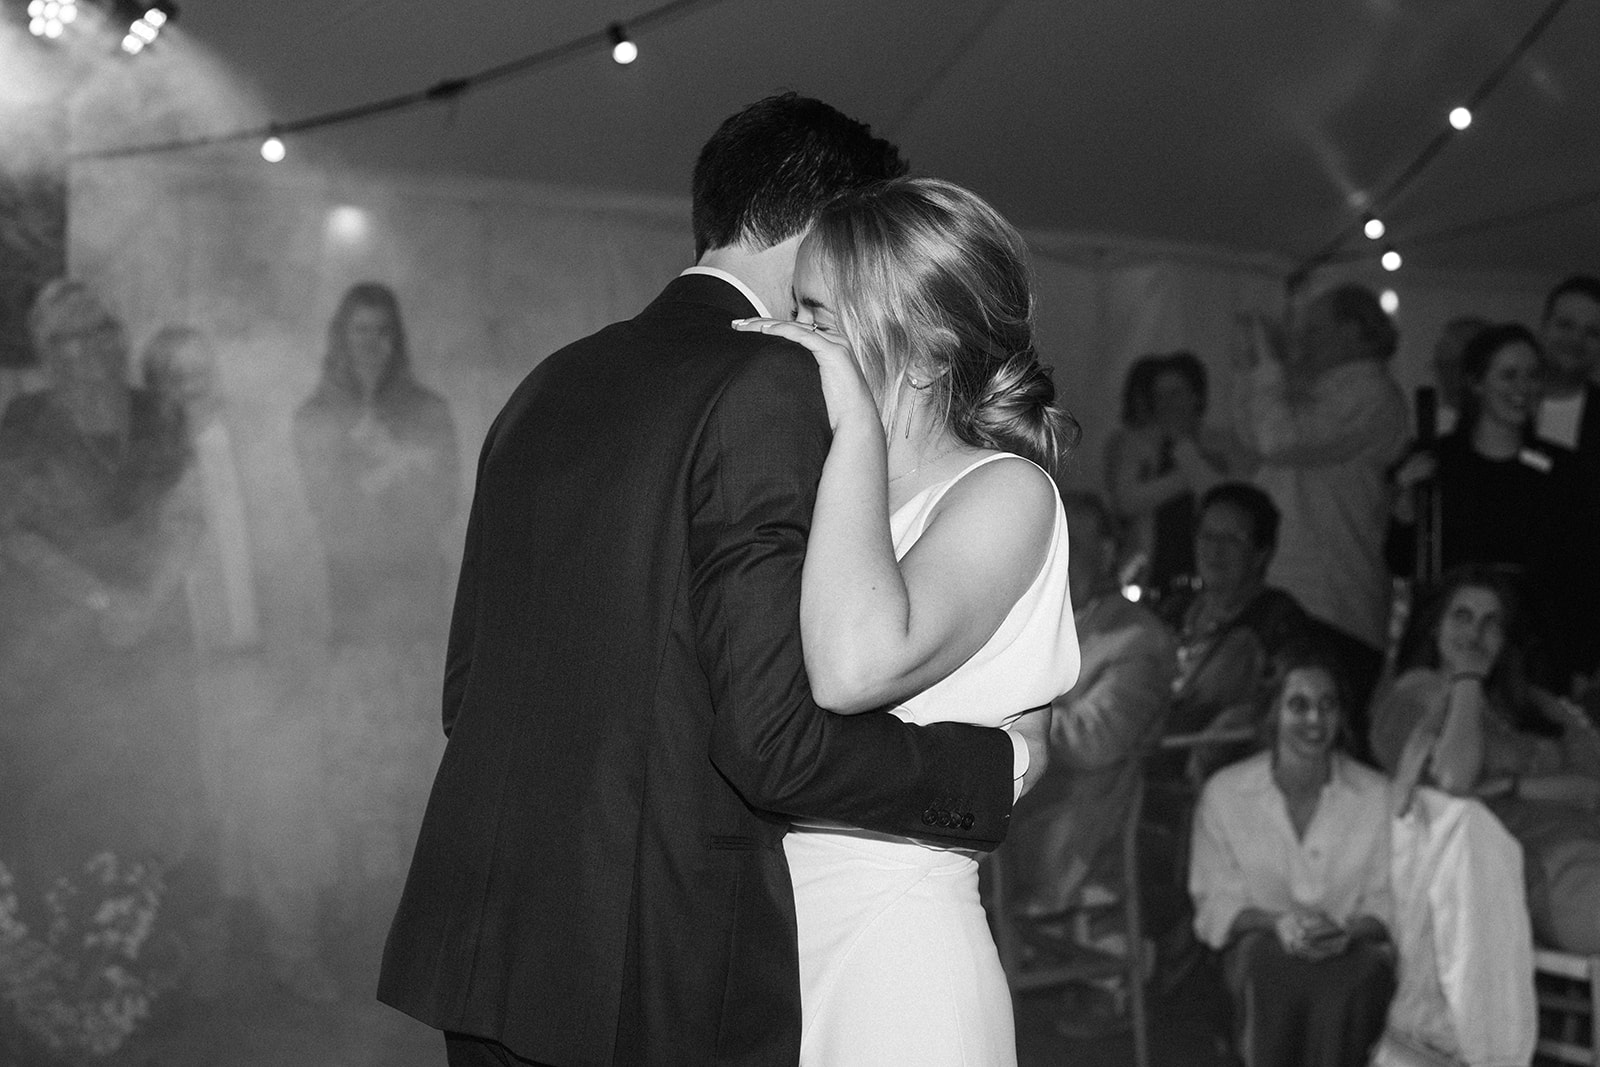 Romantic first dance under twinkling string lights